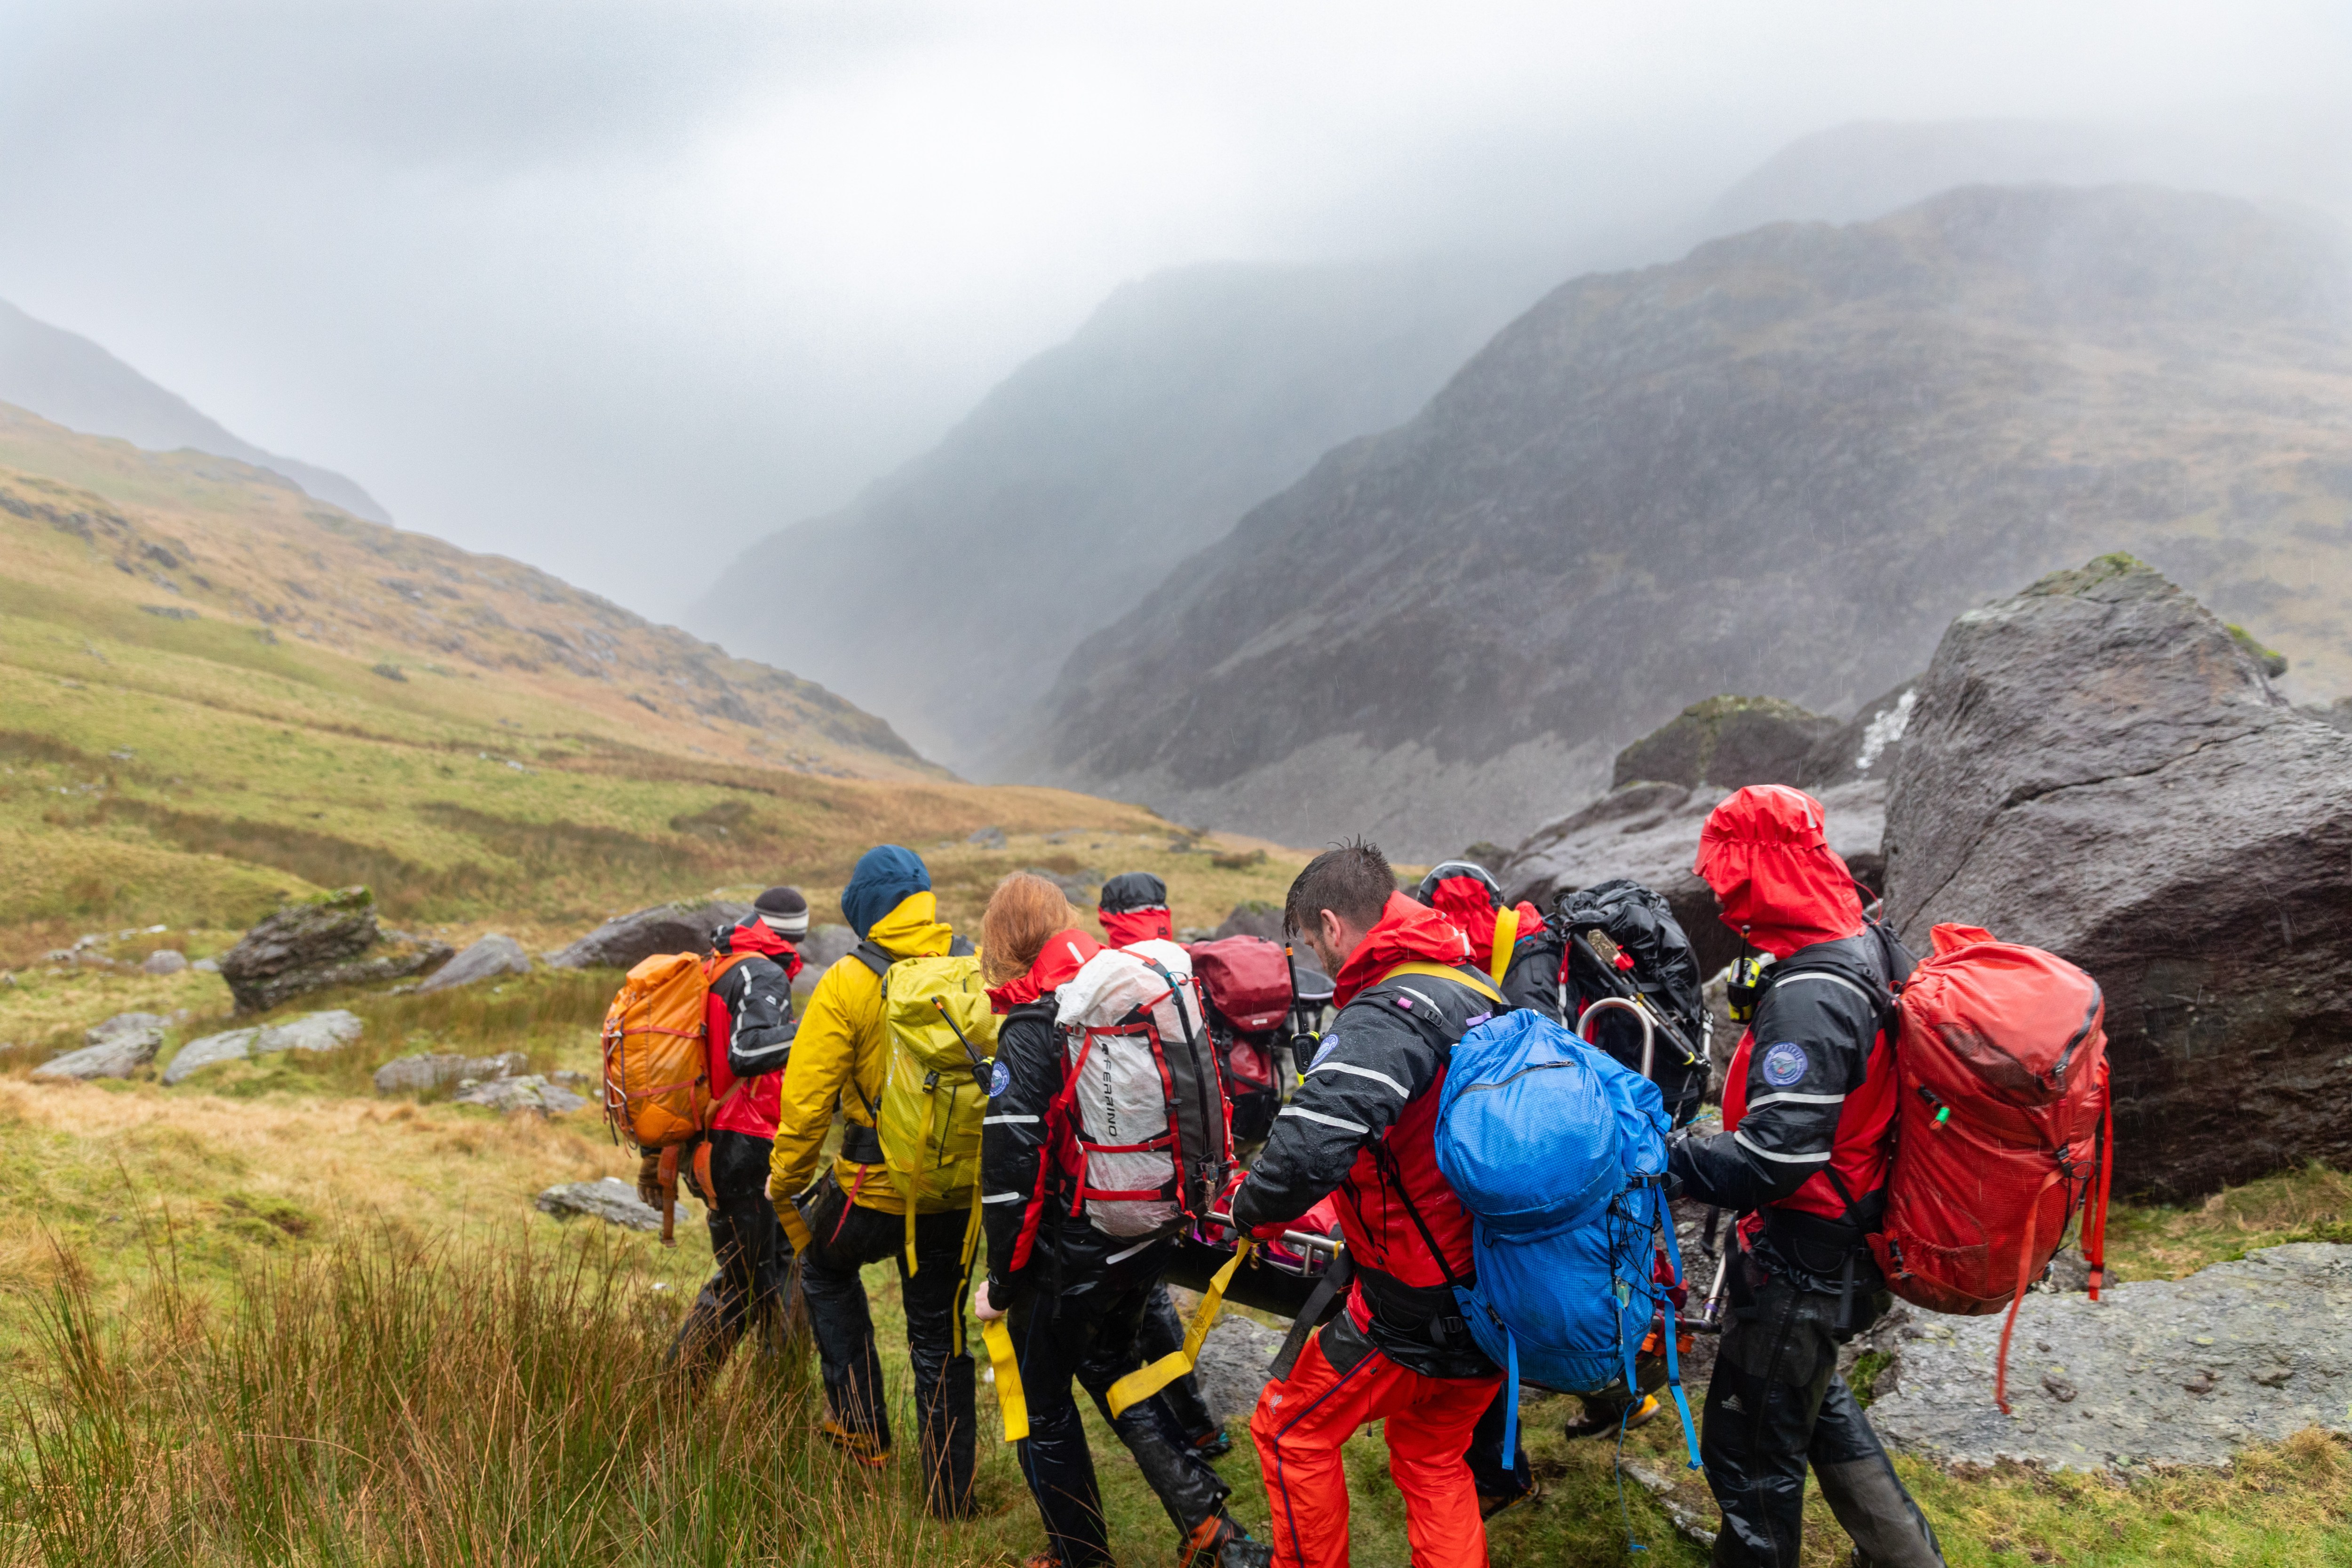 My dramatic day with Britain’s busiest mountain rescue team